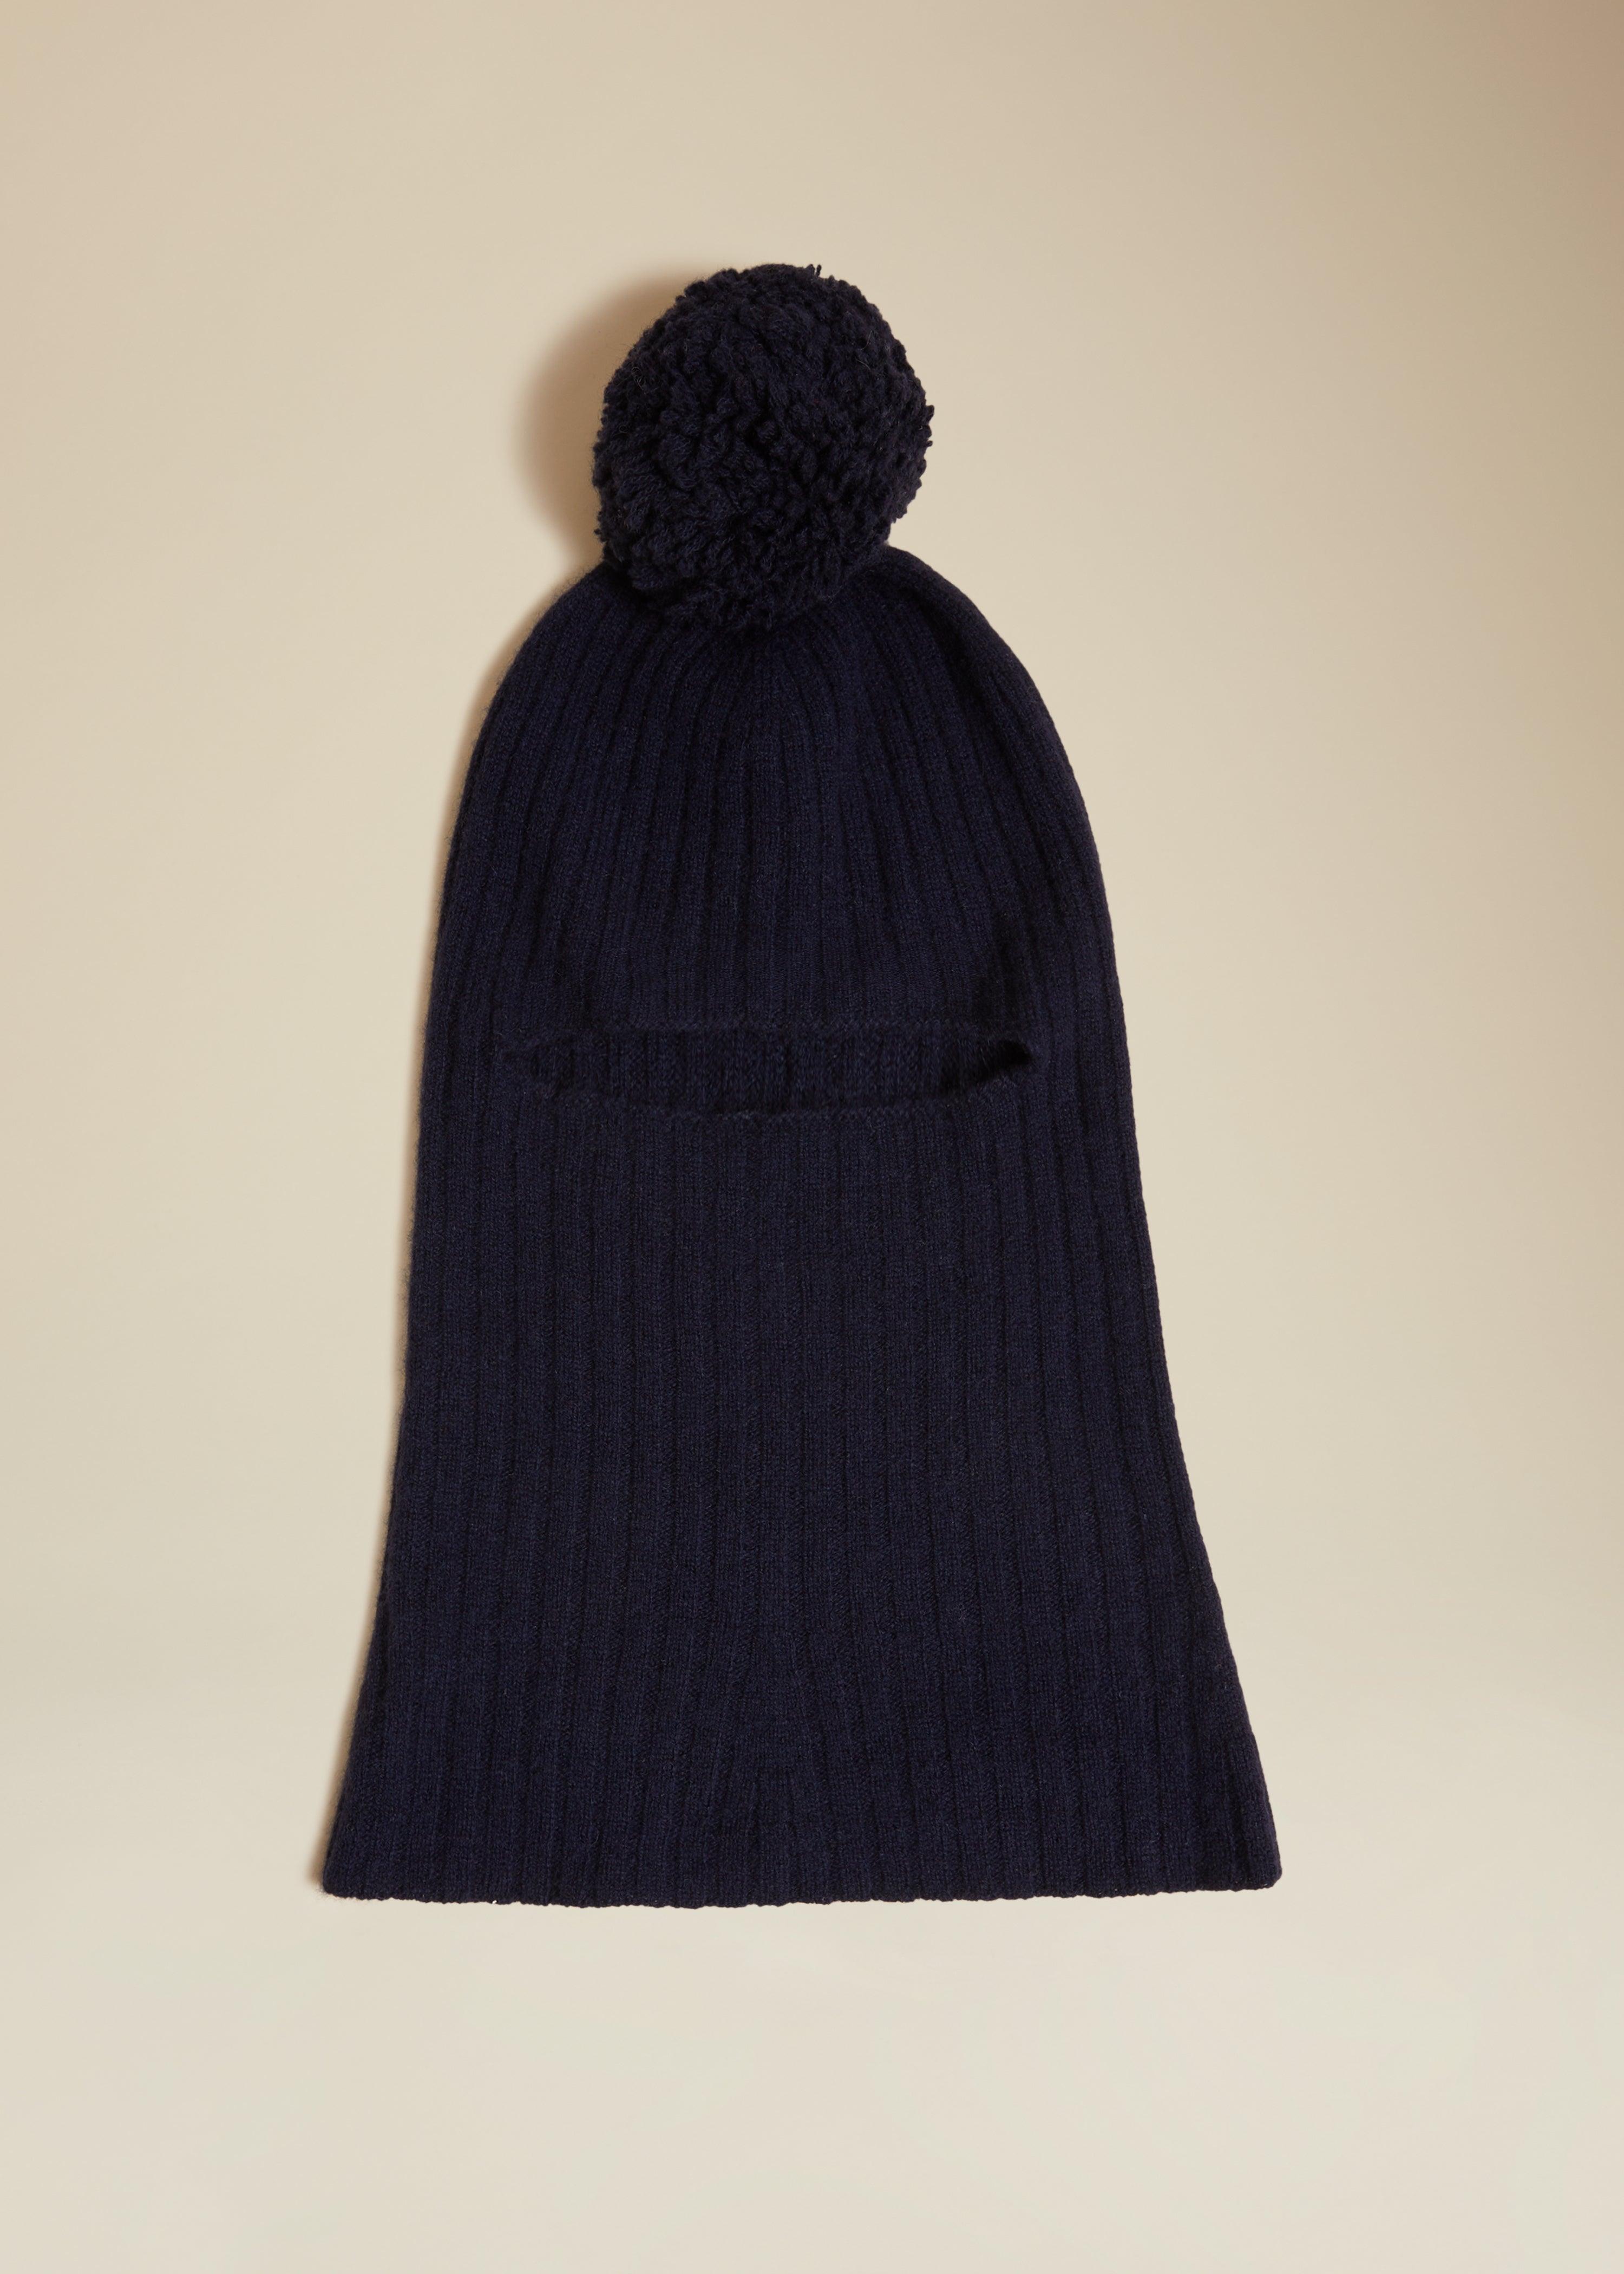 The London Balaclava in Marine - The Iconic Issue